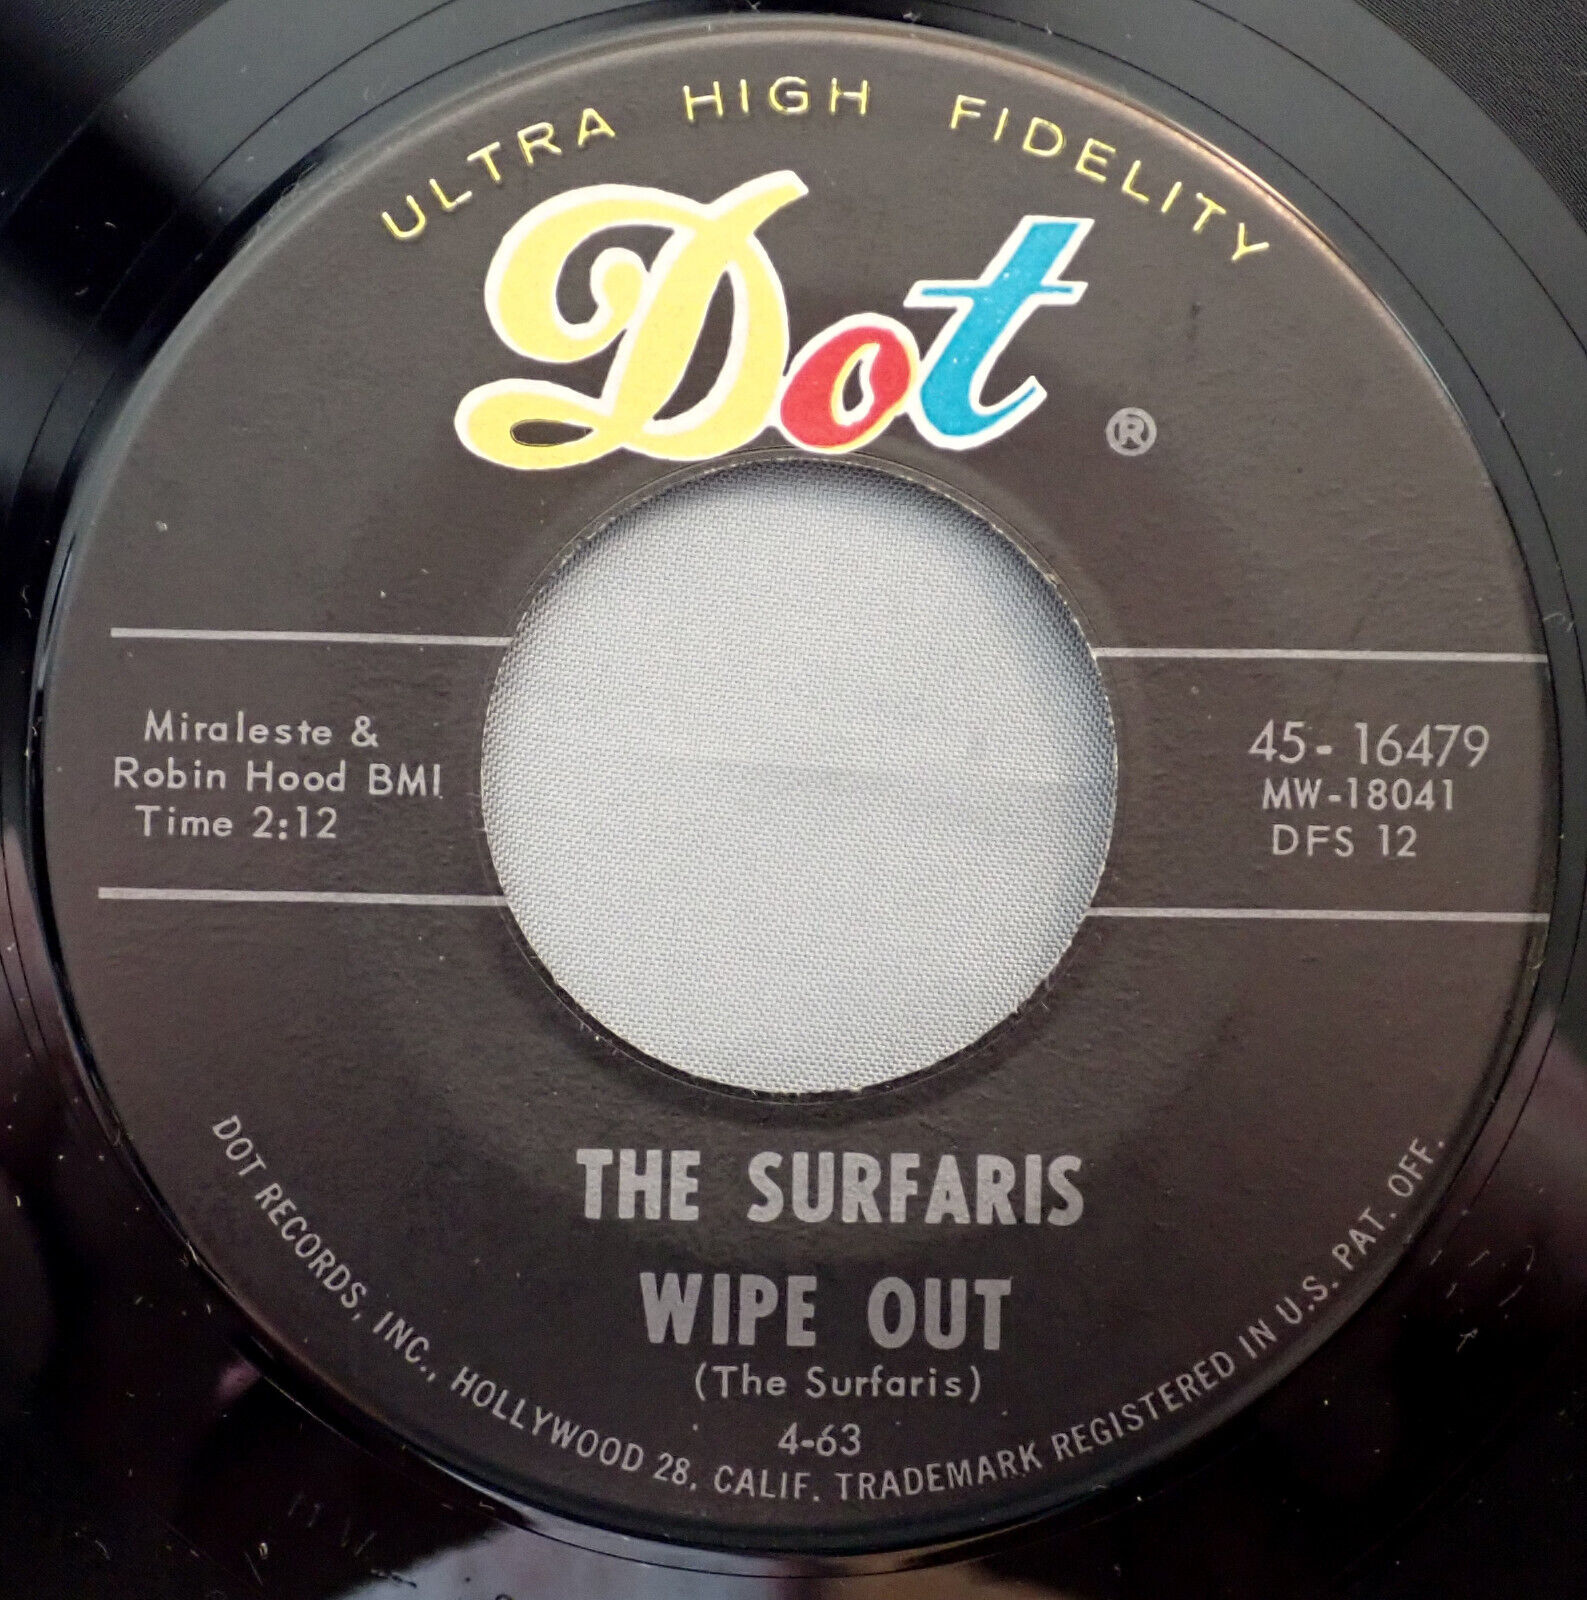 HEAR IT 60's Surf Instrumental 45 rpm record The Surfaris "Wipe Out" from 1963